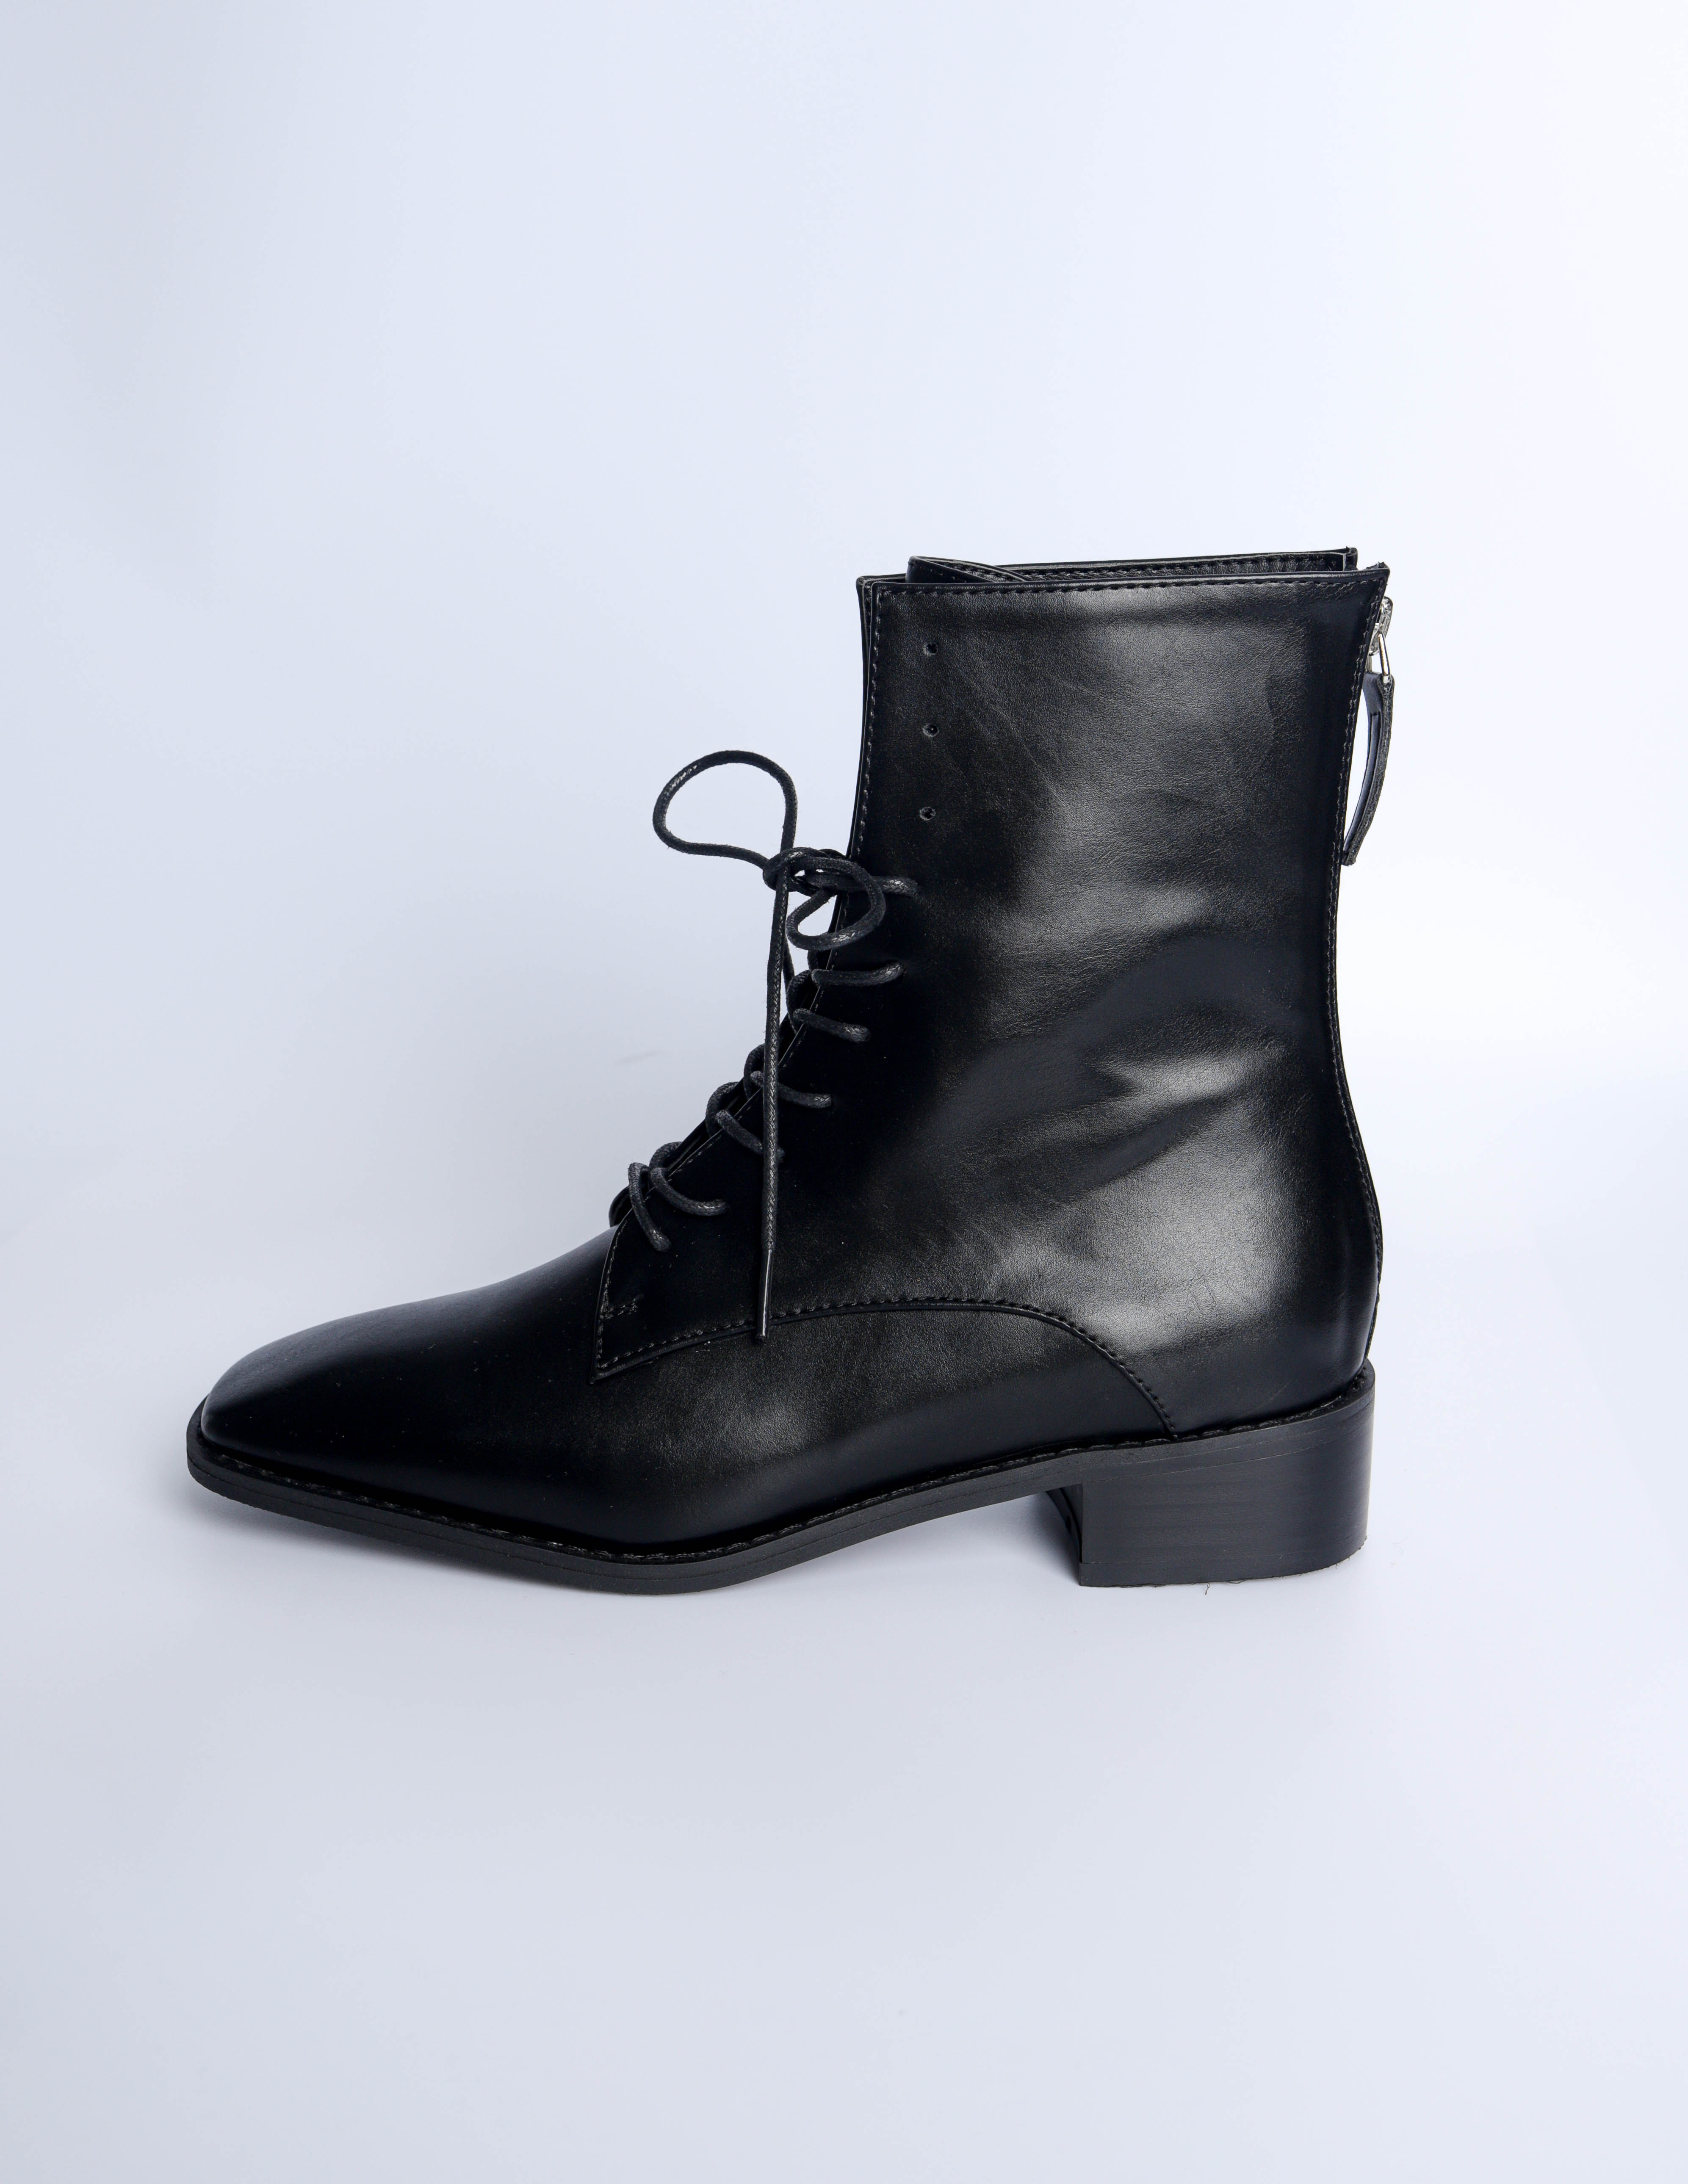 Lace-Up Low Heel Boots